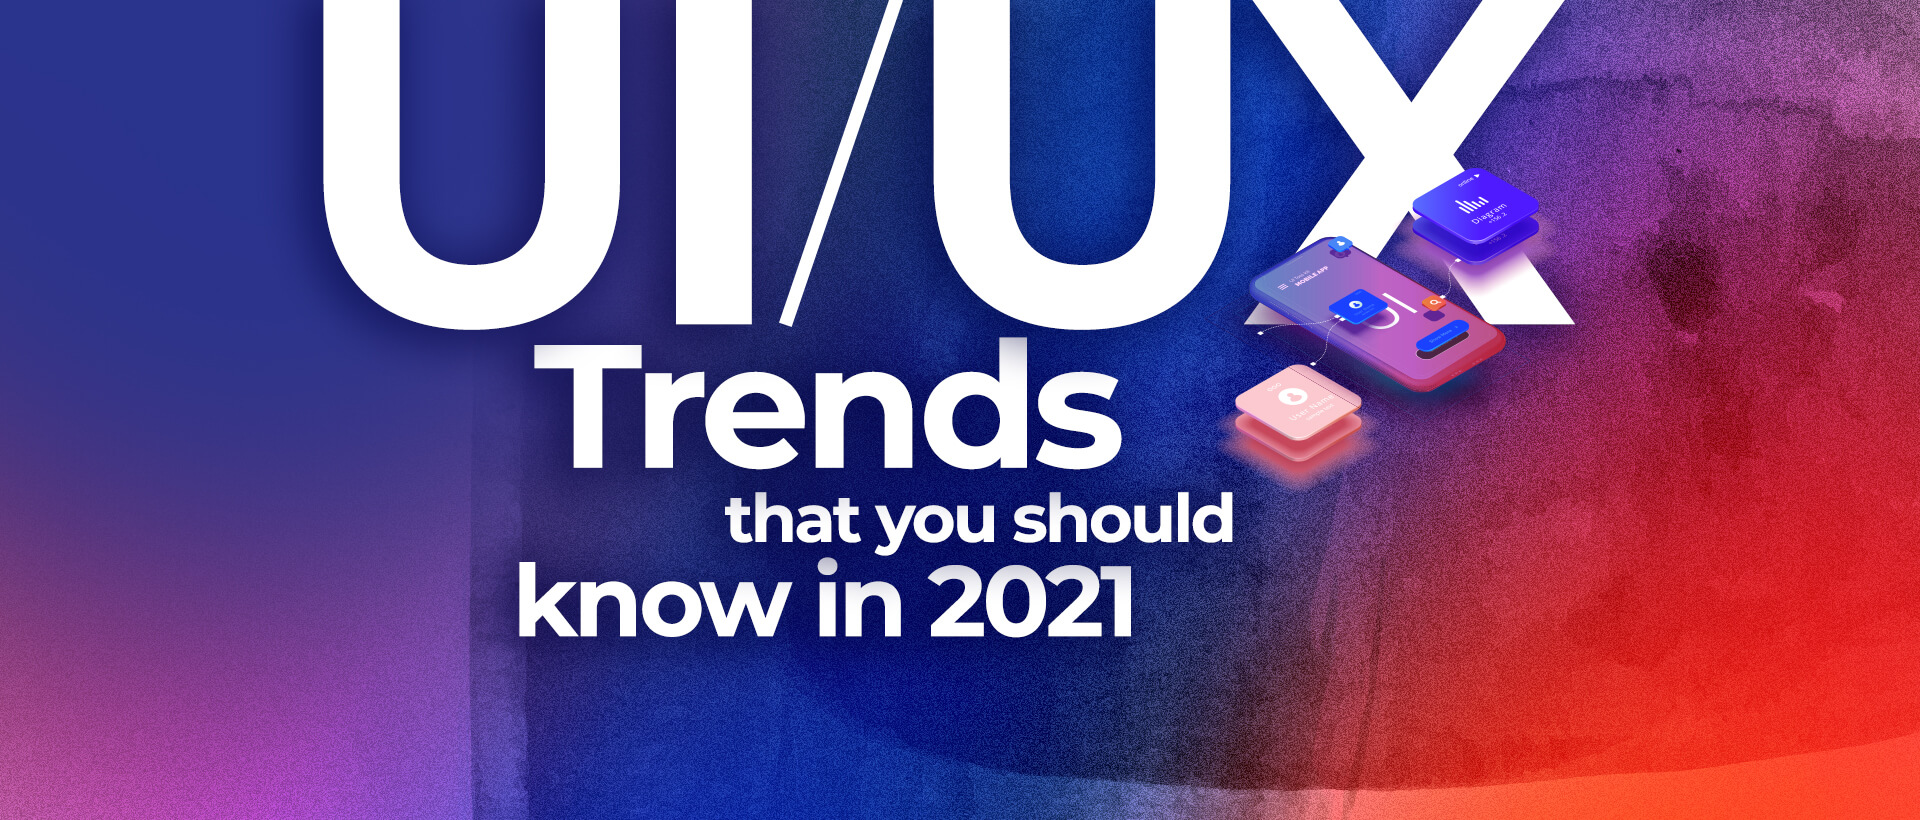 UI/UX Trends that you should know in 2021